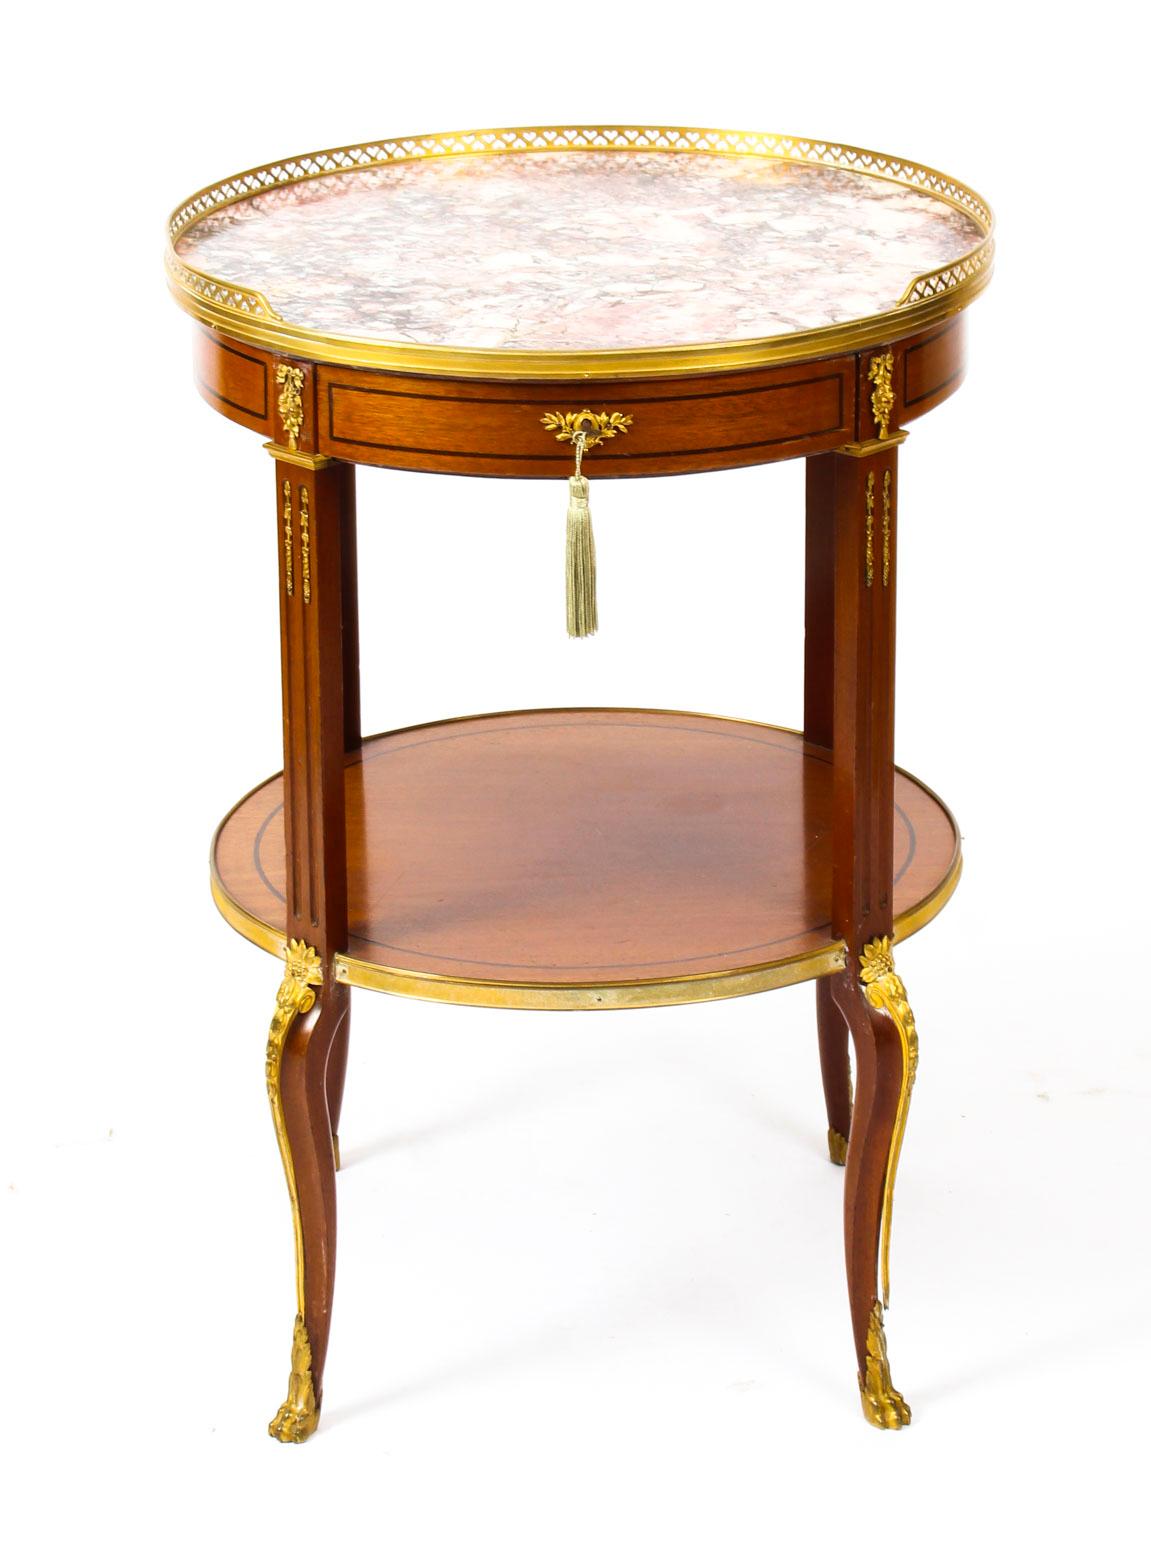 Antique French Louis Revival Marble and Ormolu Occasional Table, 19th Century For Sale 9